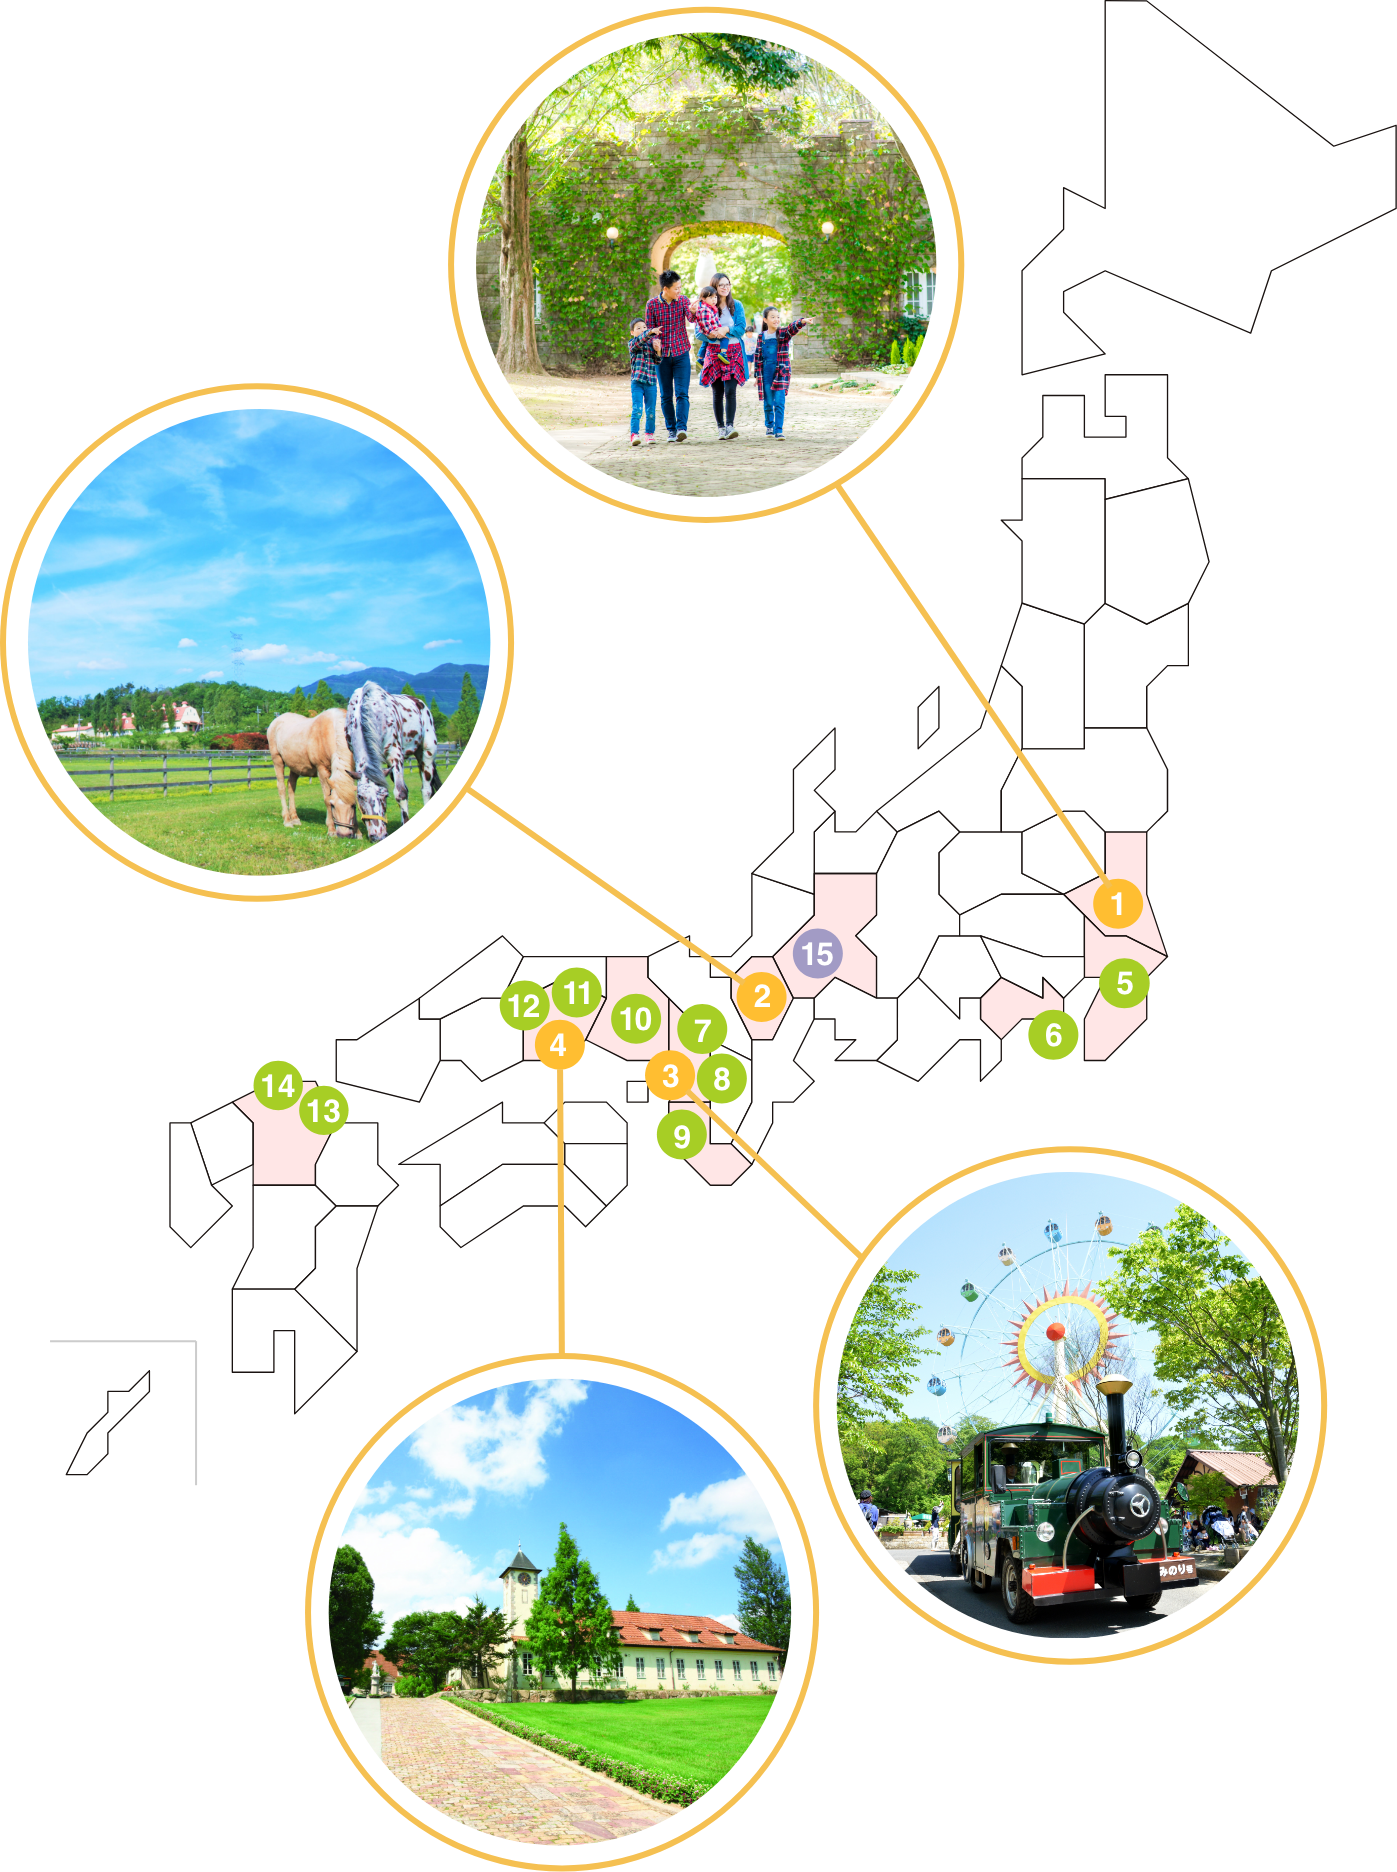 Operation of nature-rich agricultural parks and similar facilities at 15 locations around Japan